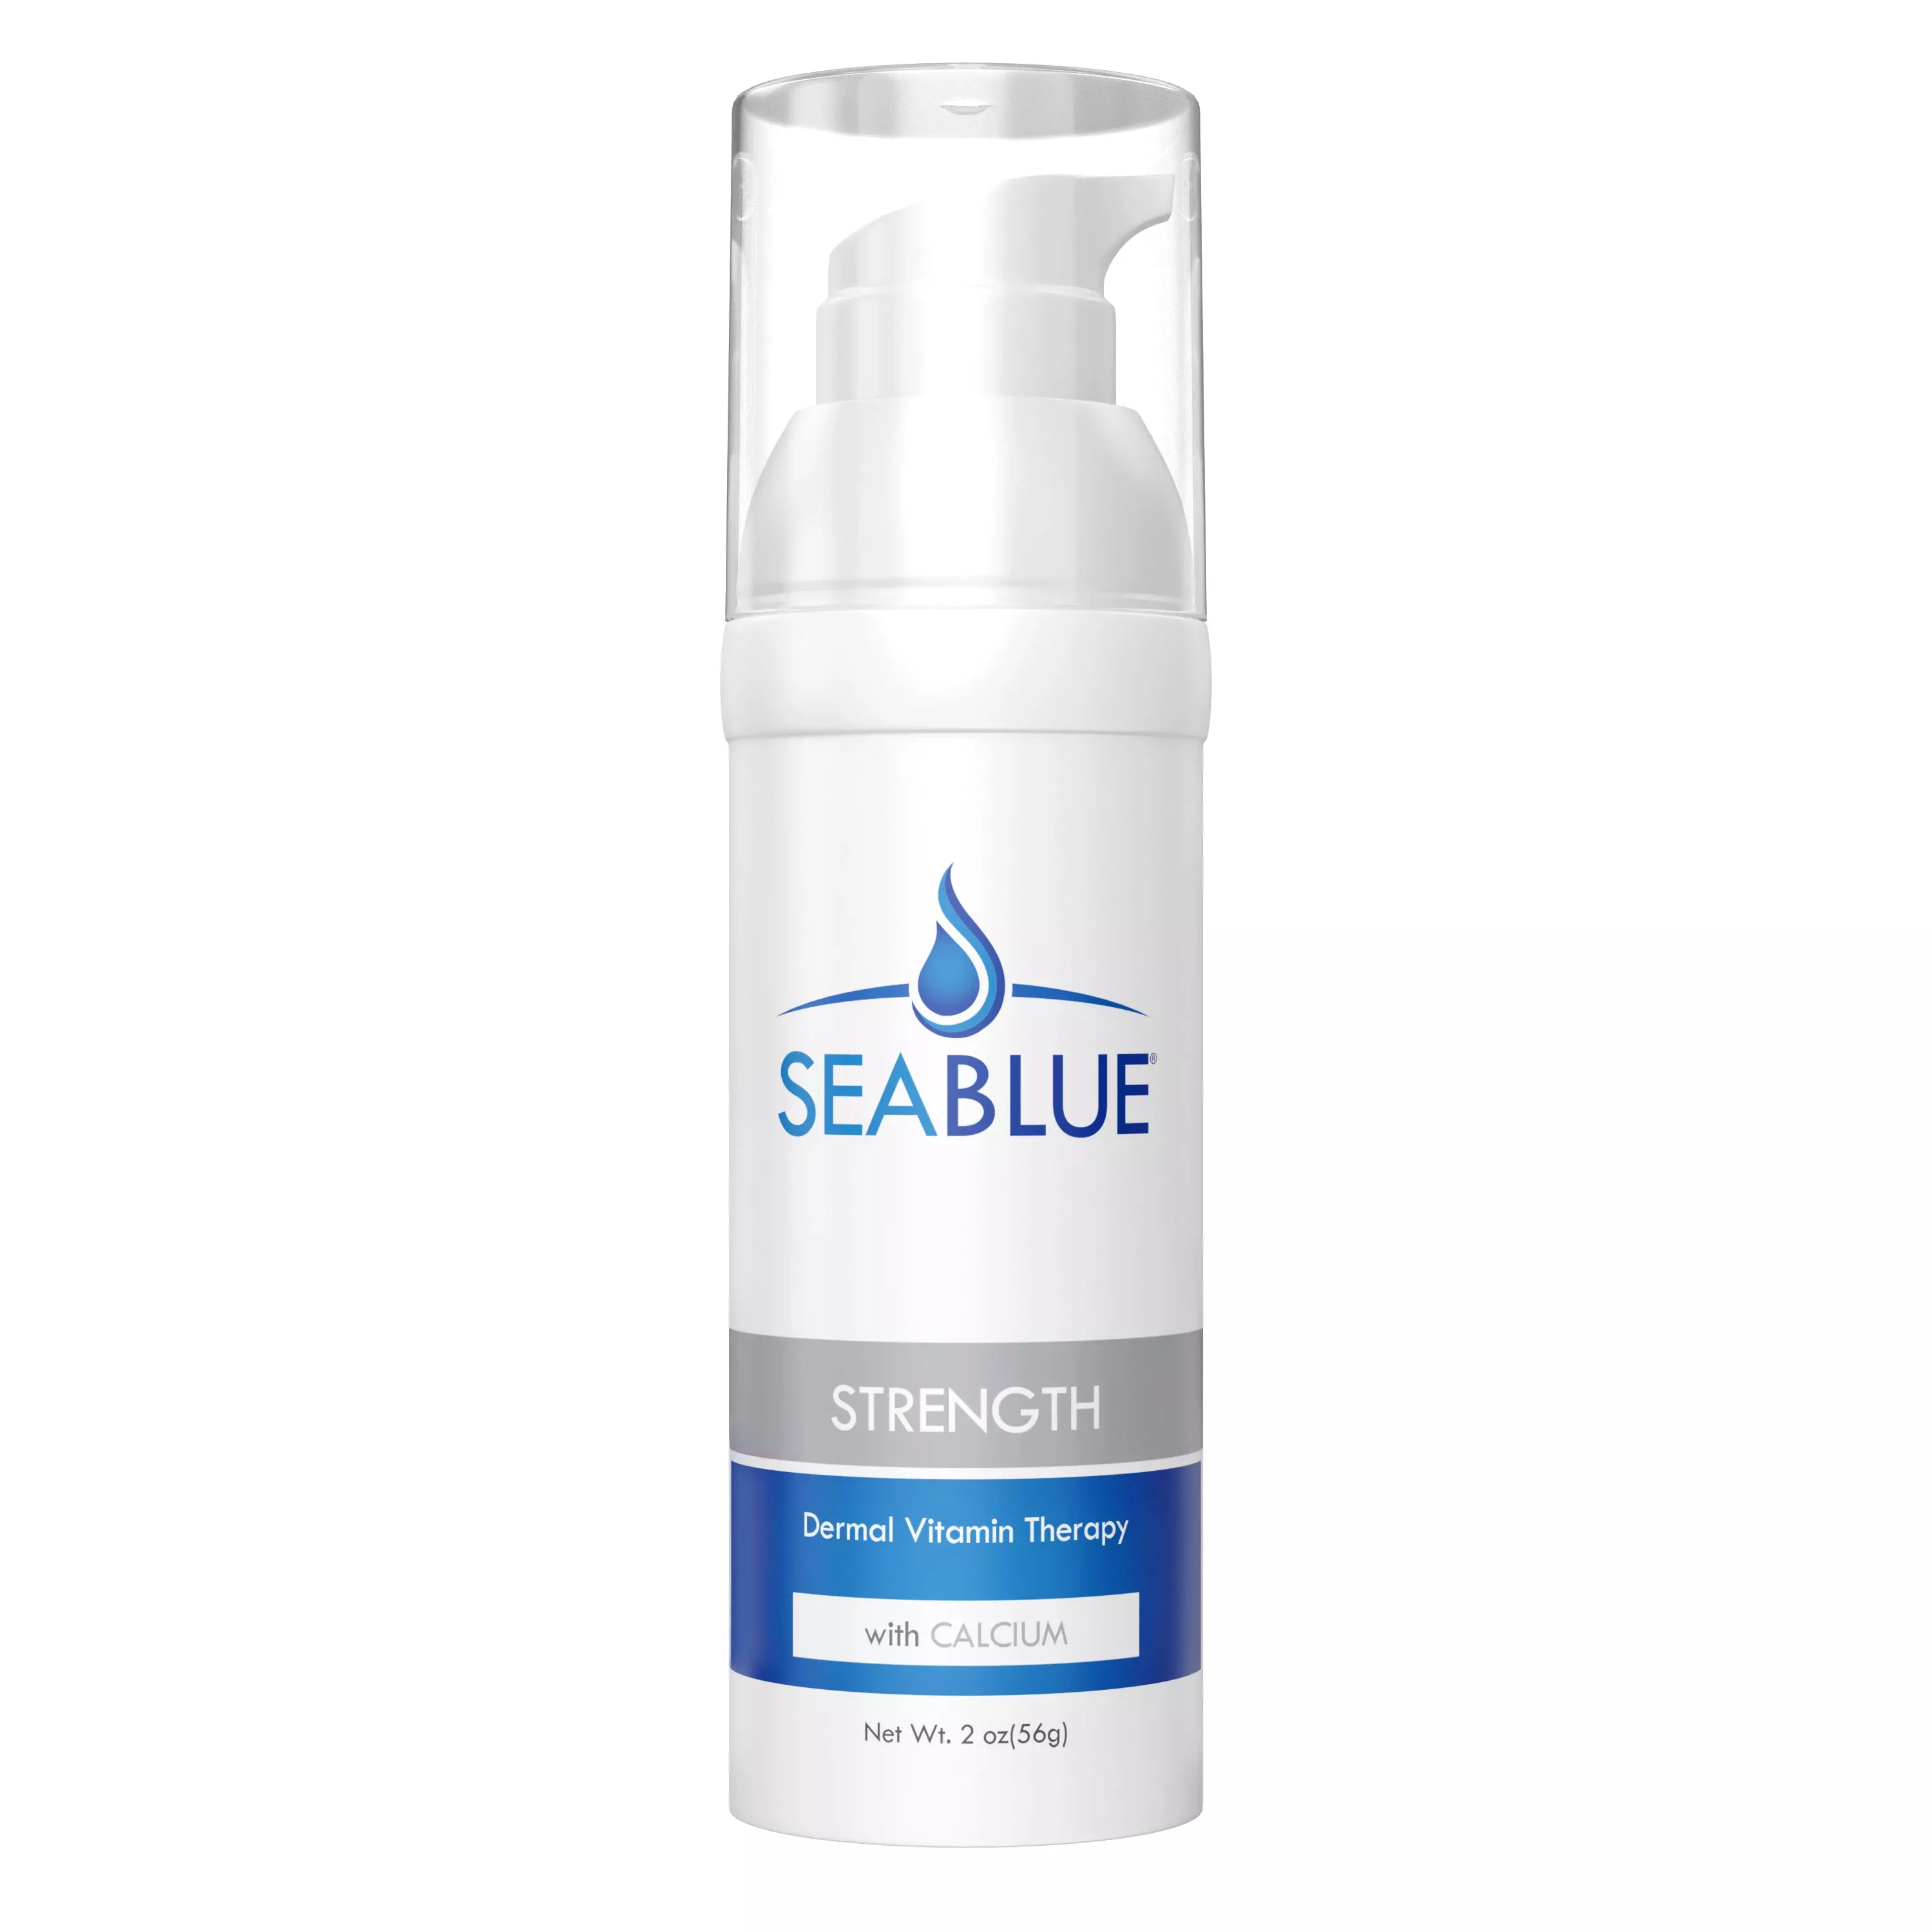 Seablue Strength Dermal Vitamin Therapy With Calcium